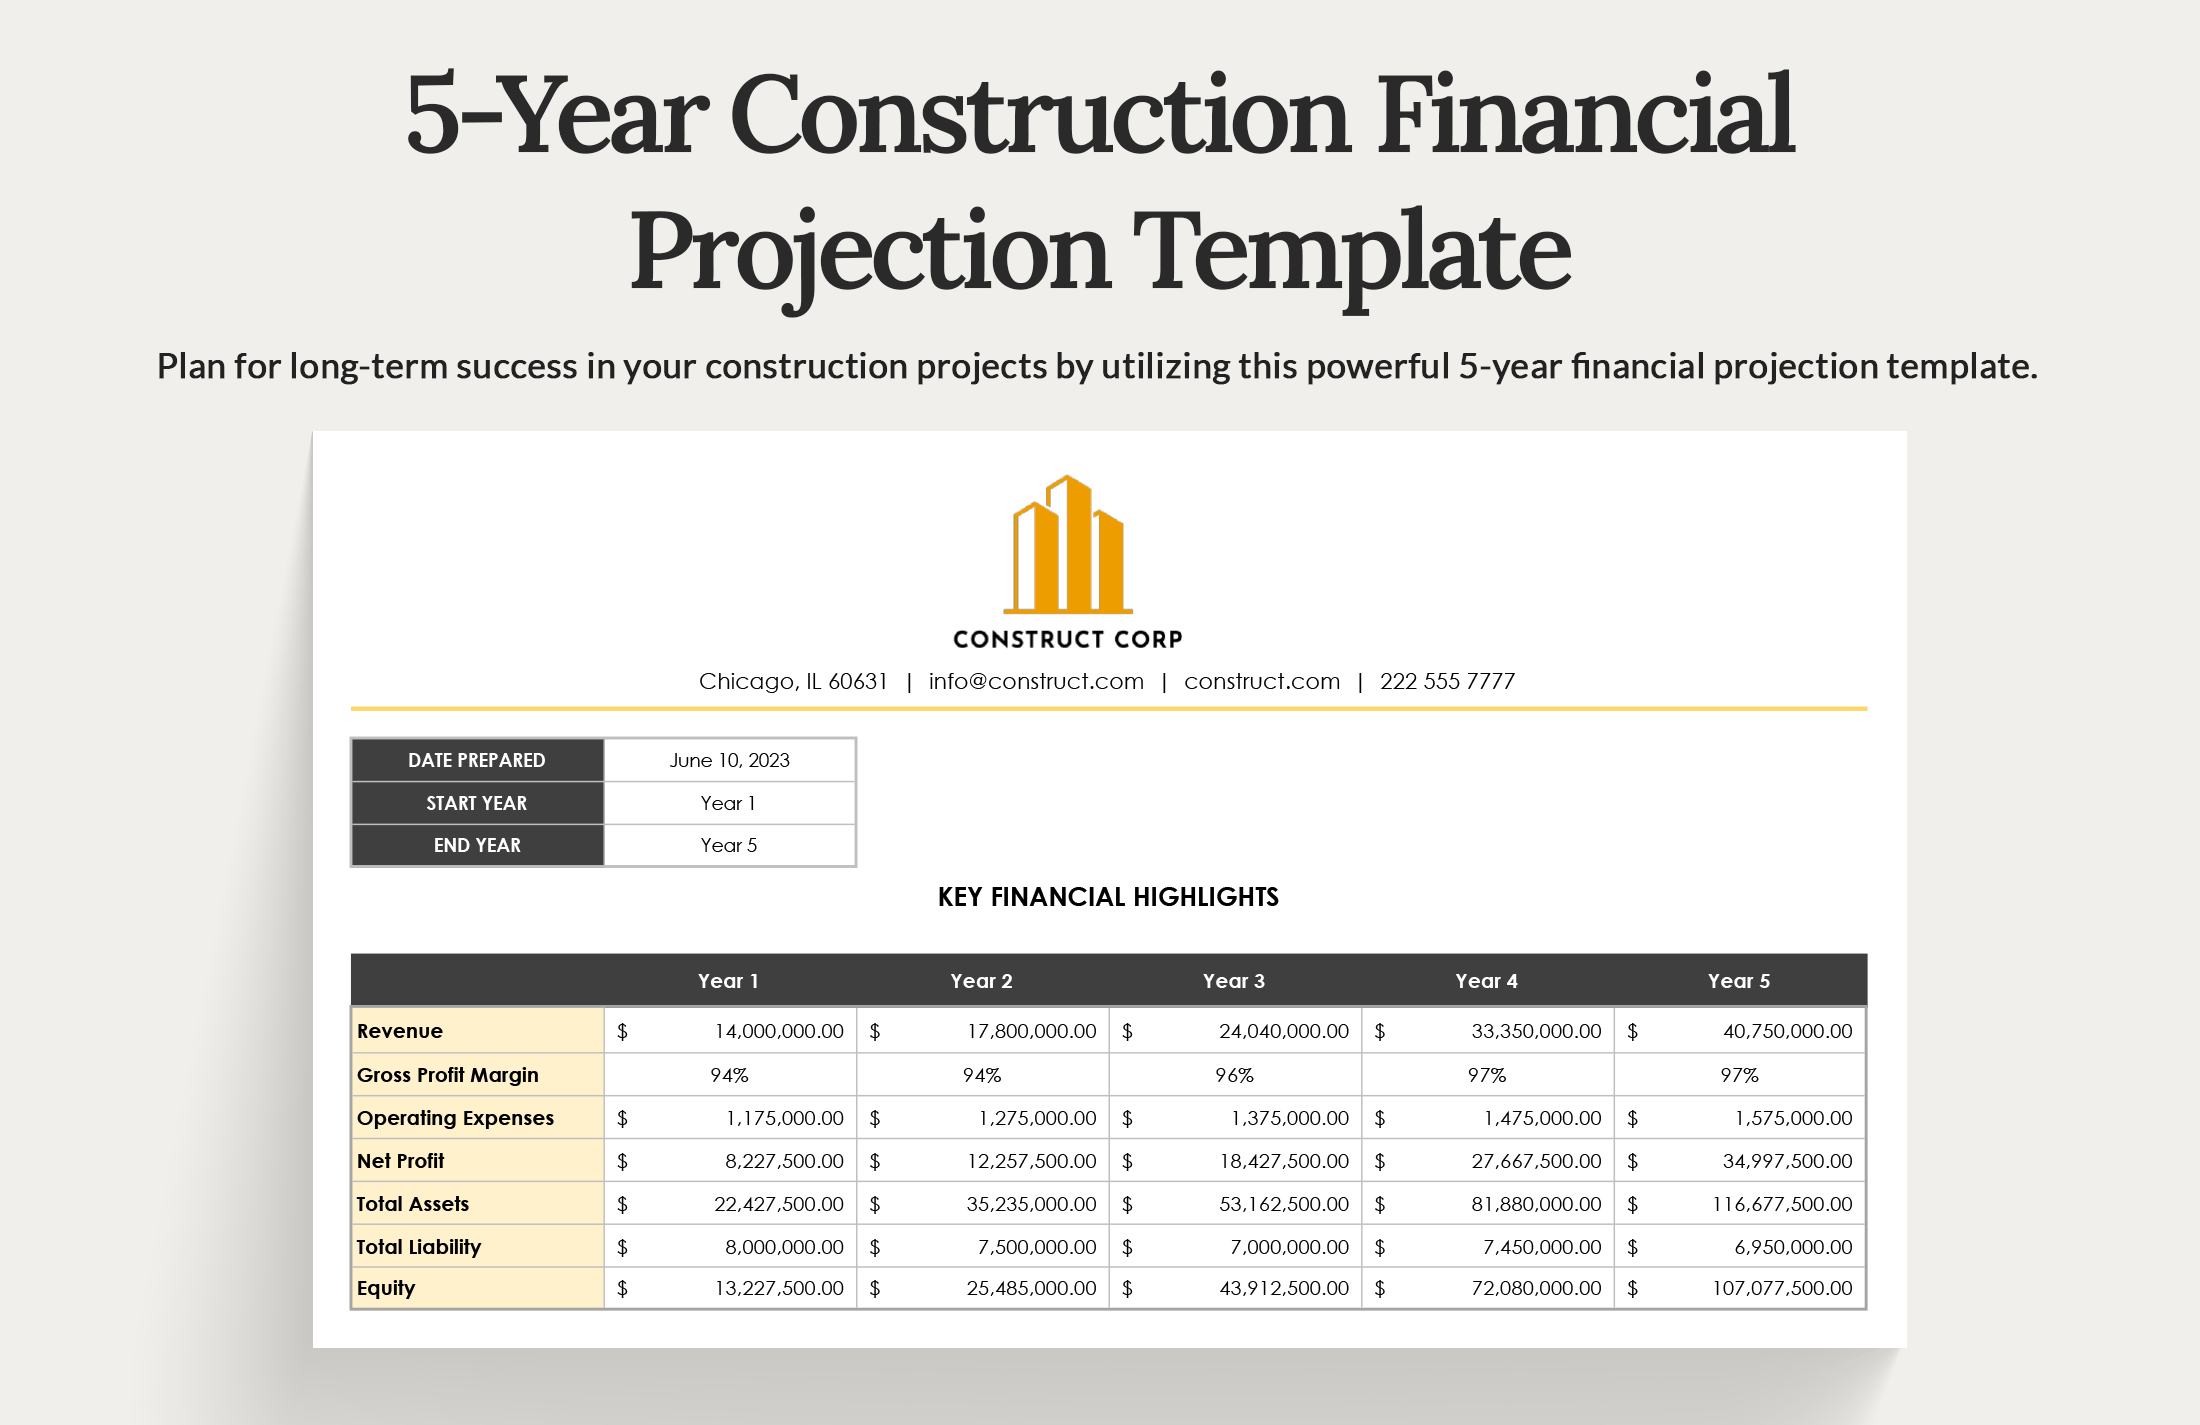 5 year construction financial projection template